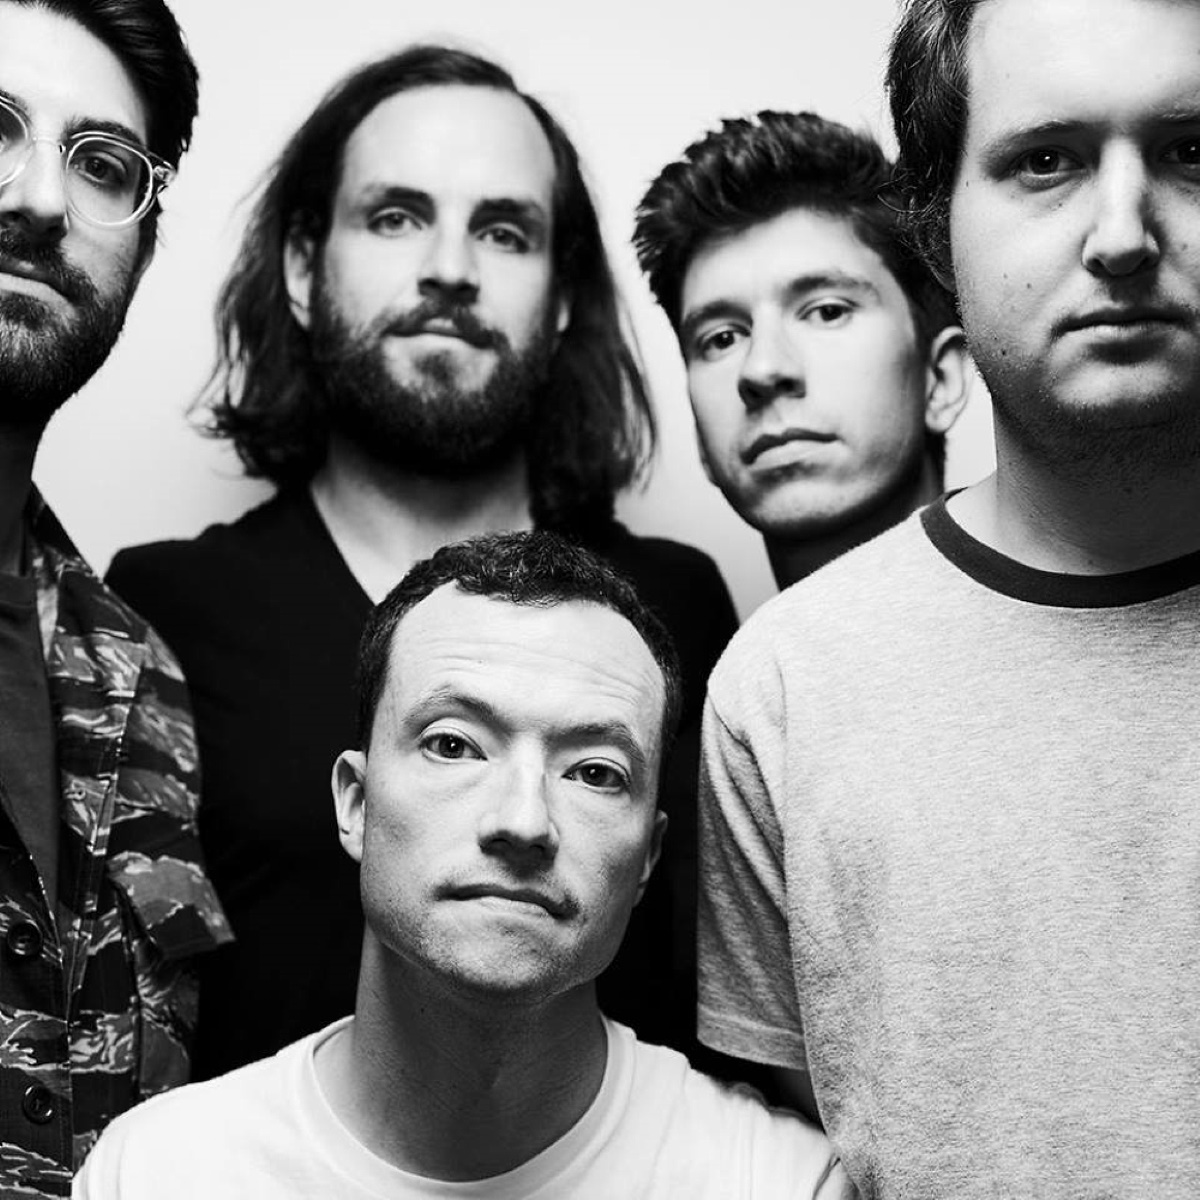 TOUCHE AMORE - Deflector - new song - IDIOTEQ.com